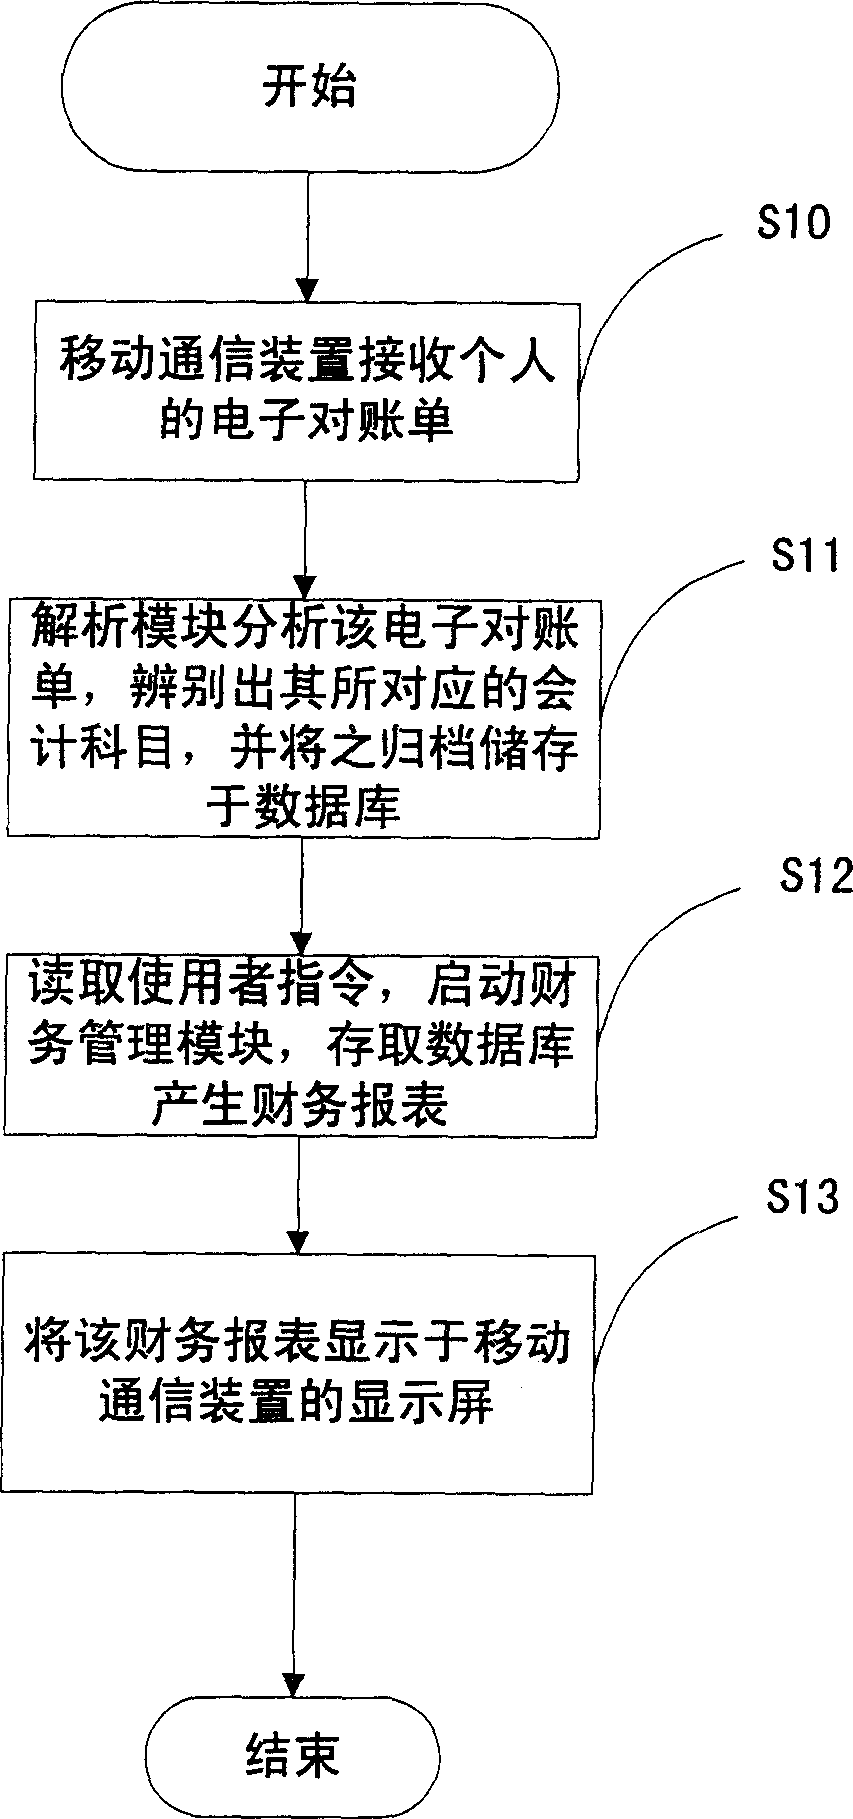 Method for personal financial management using mobile communication device